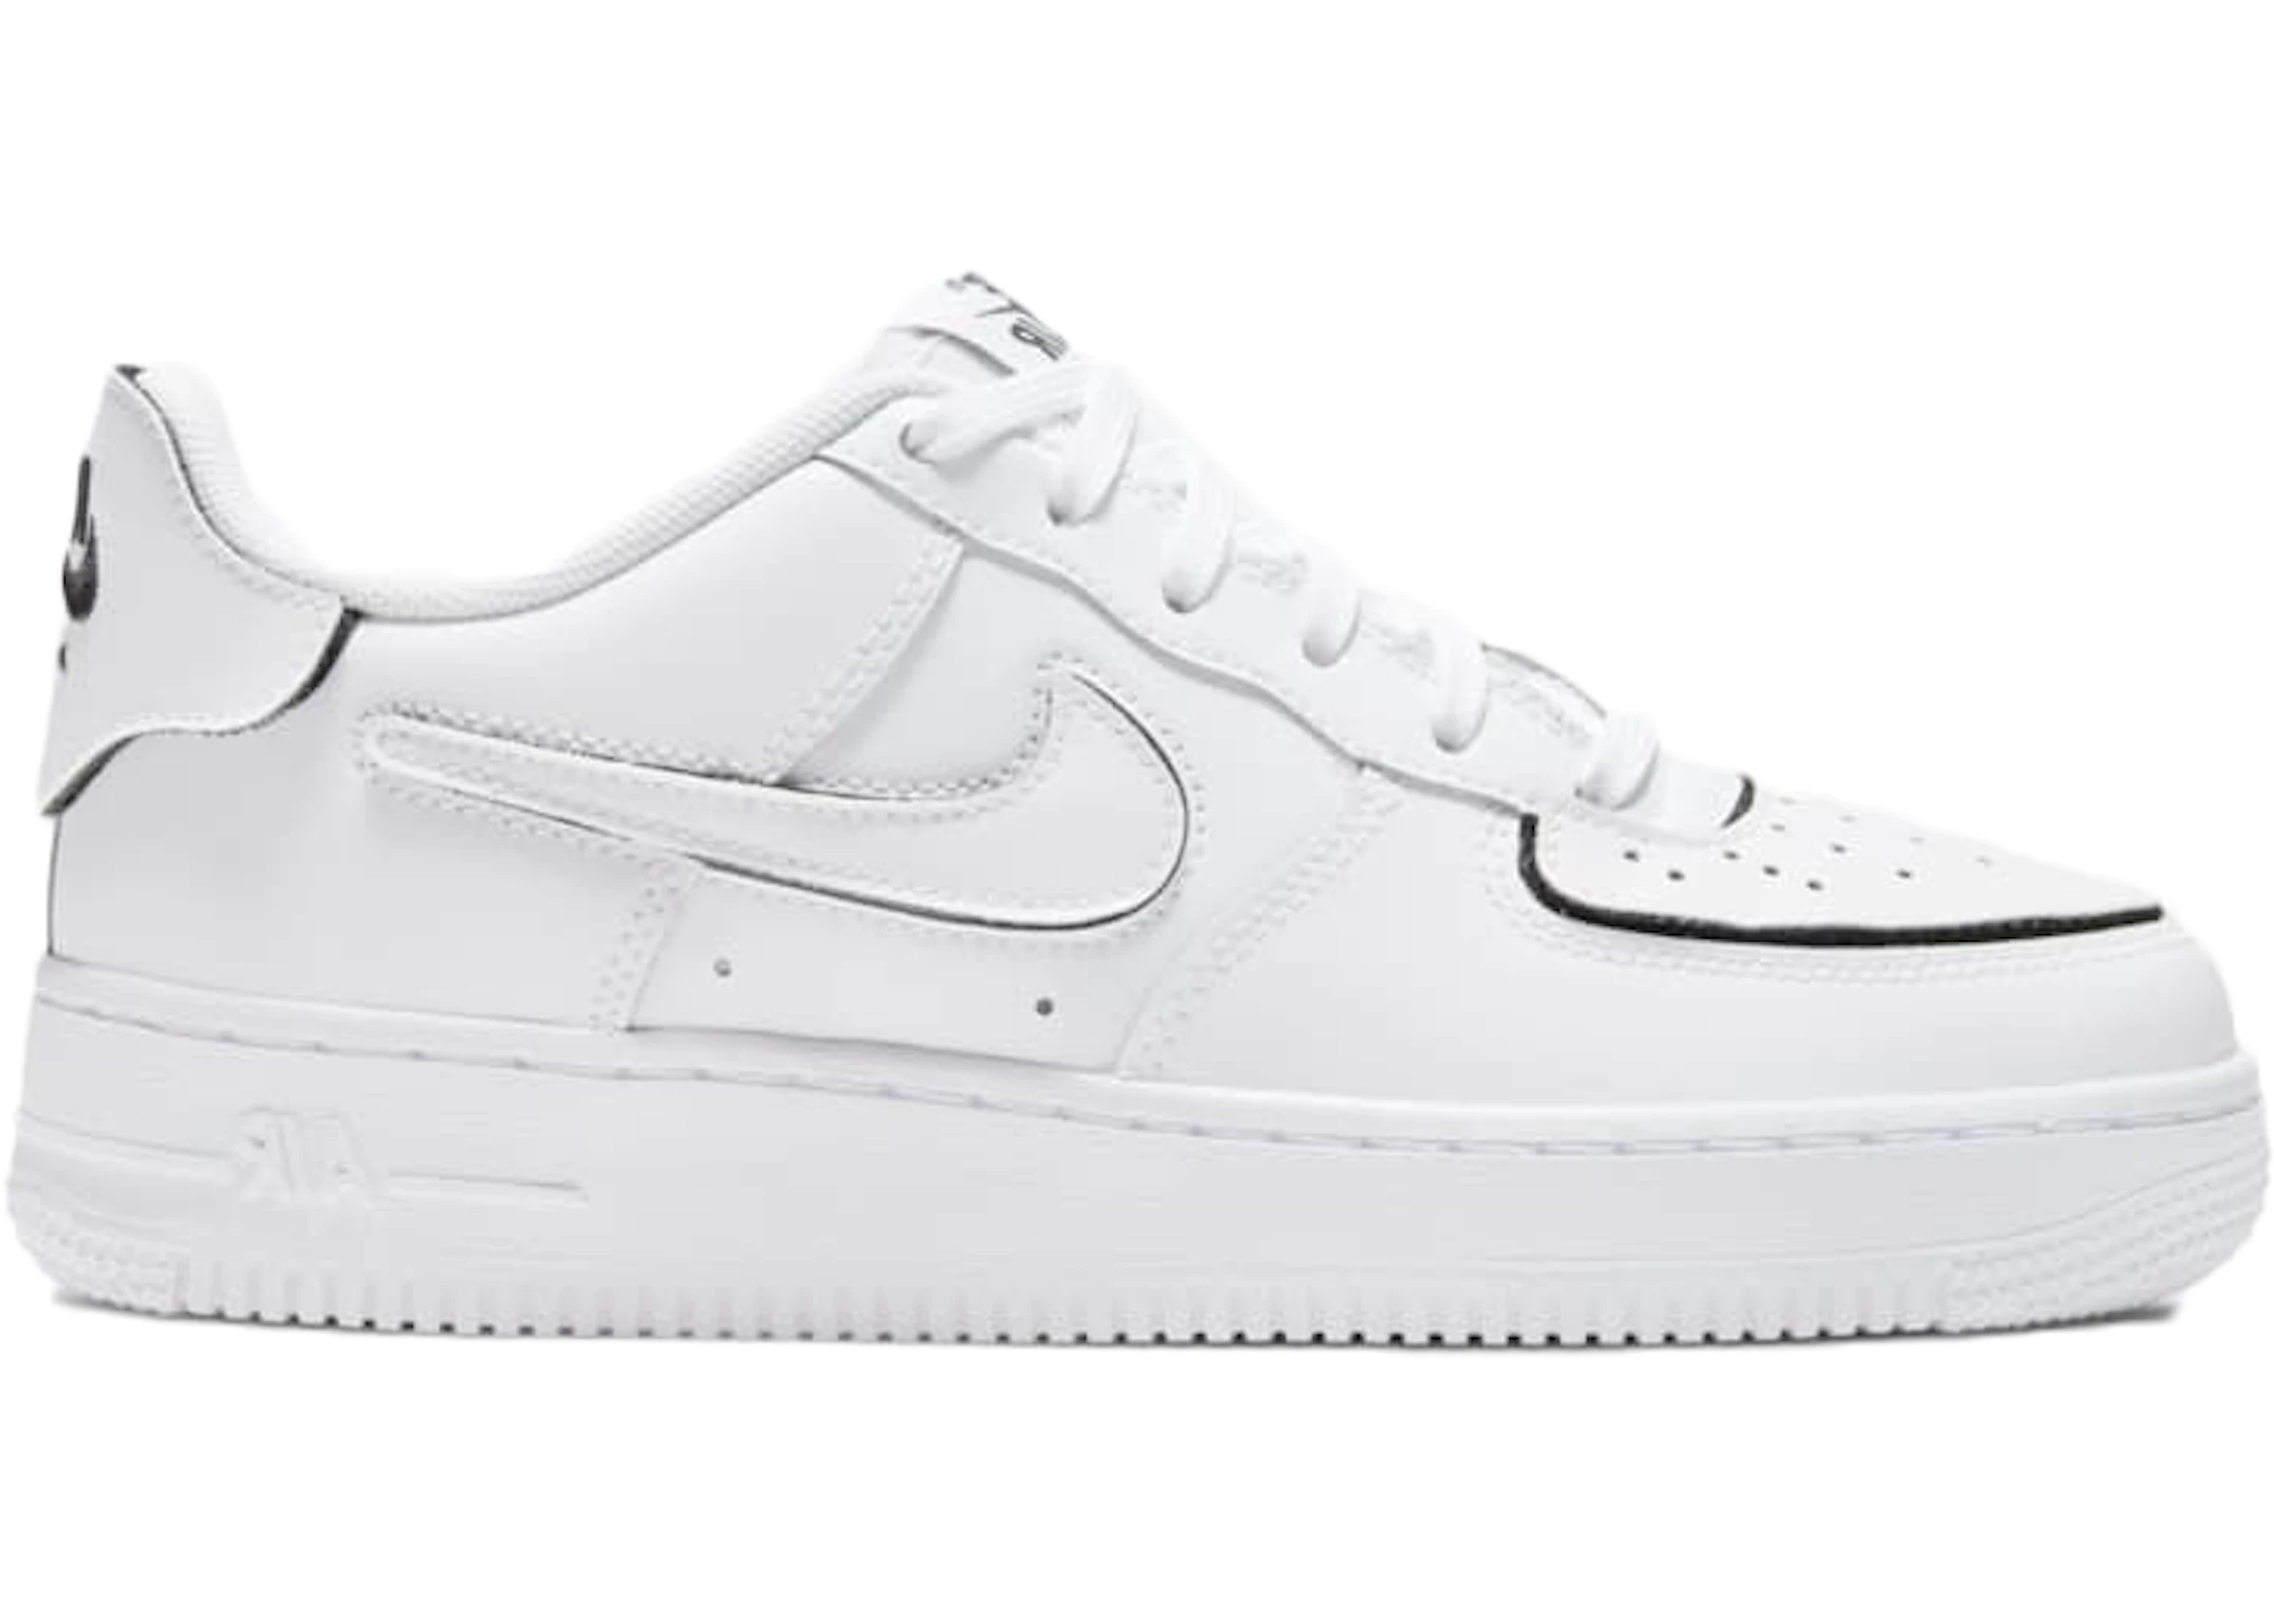 luchthaven Bepalen Kostuums Nike Air Force 1/1 Cosmic Clay (GS) - CT3840-100 - US